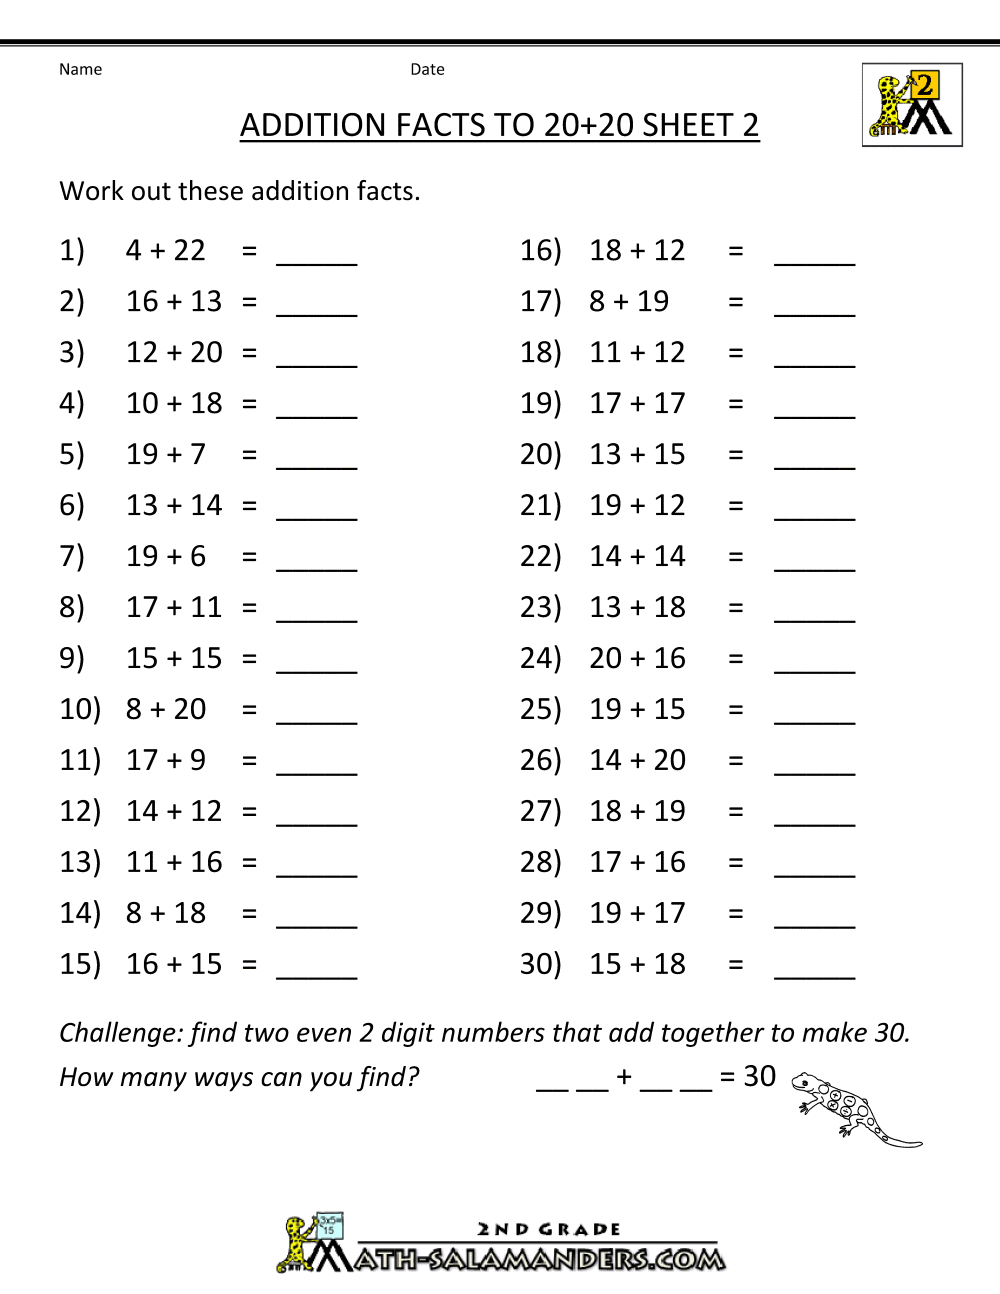 Addition Facts To 20 Printable Worksheets - Printable Word Searches